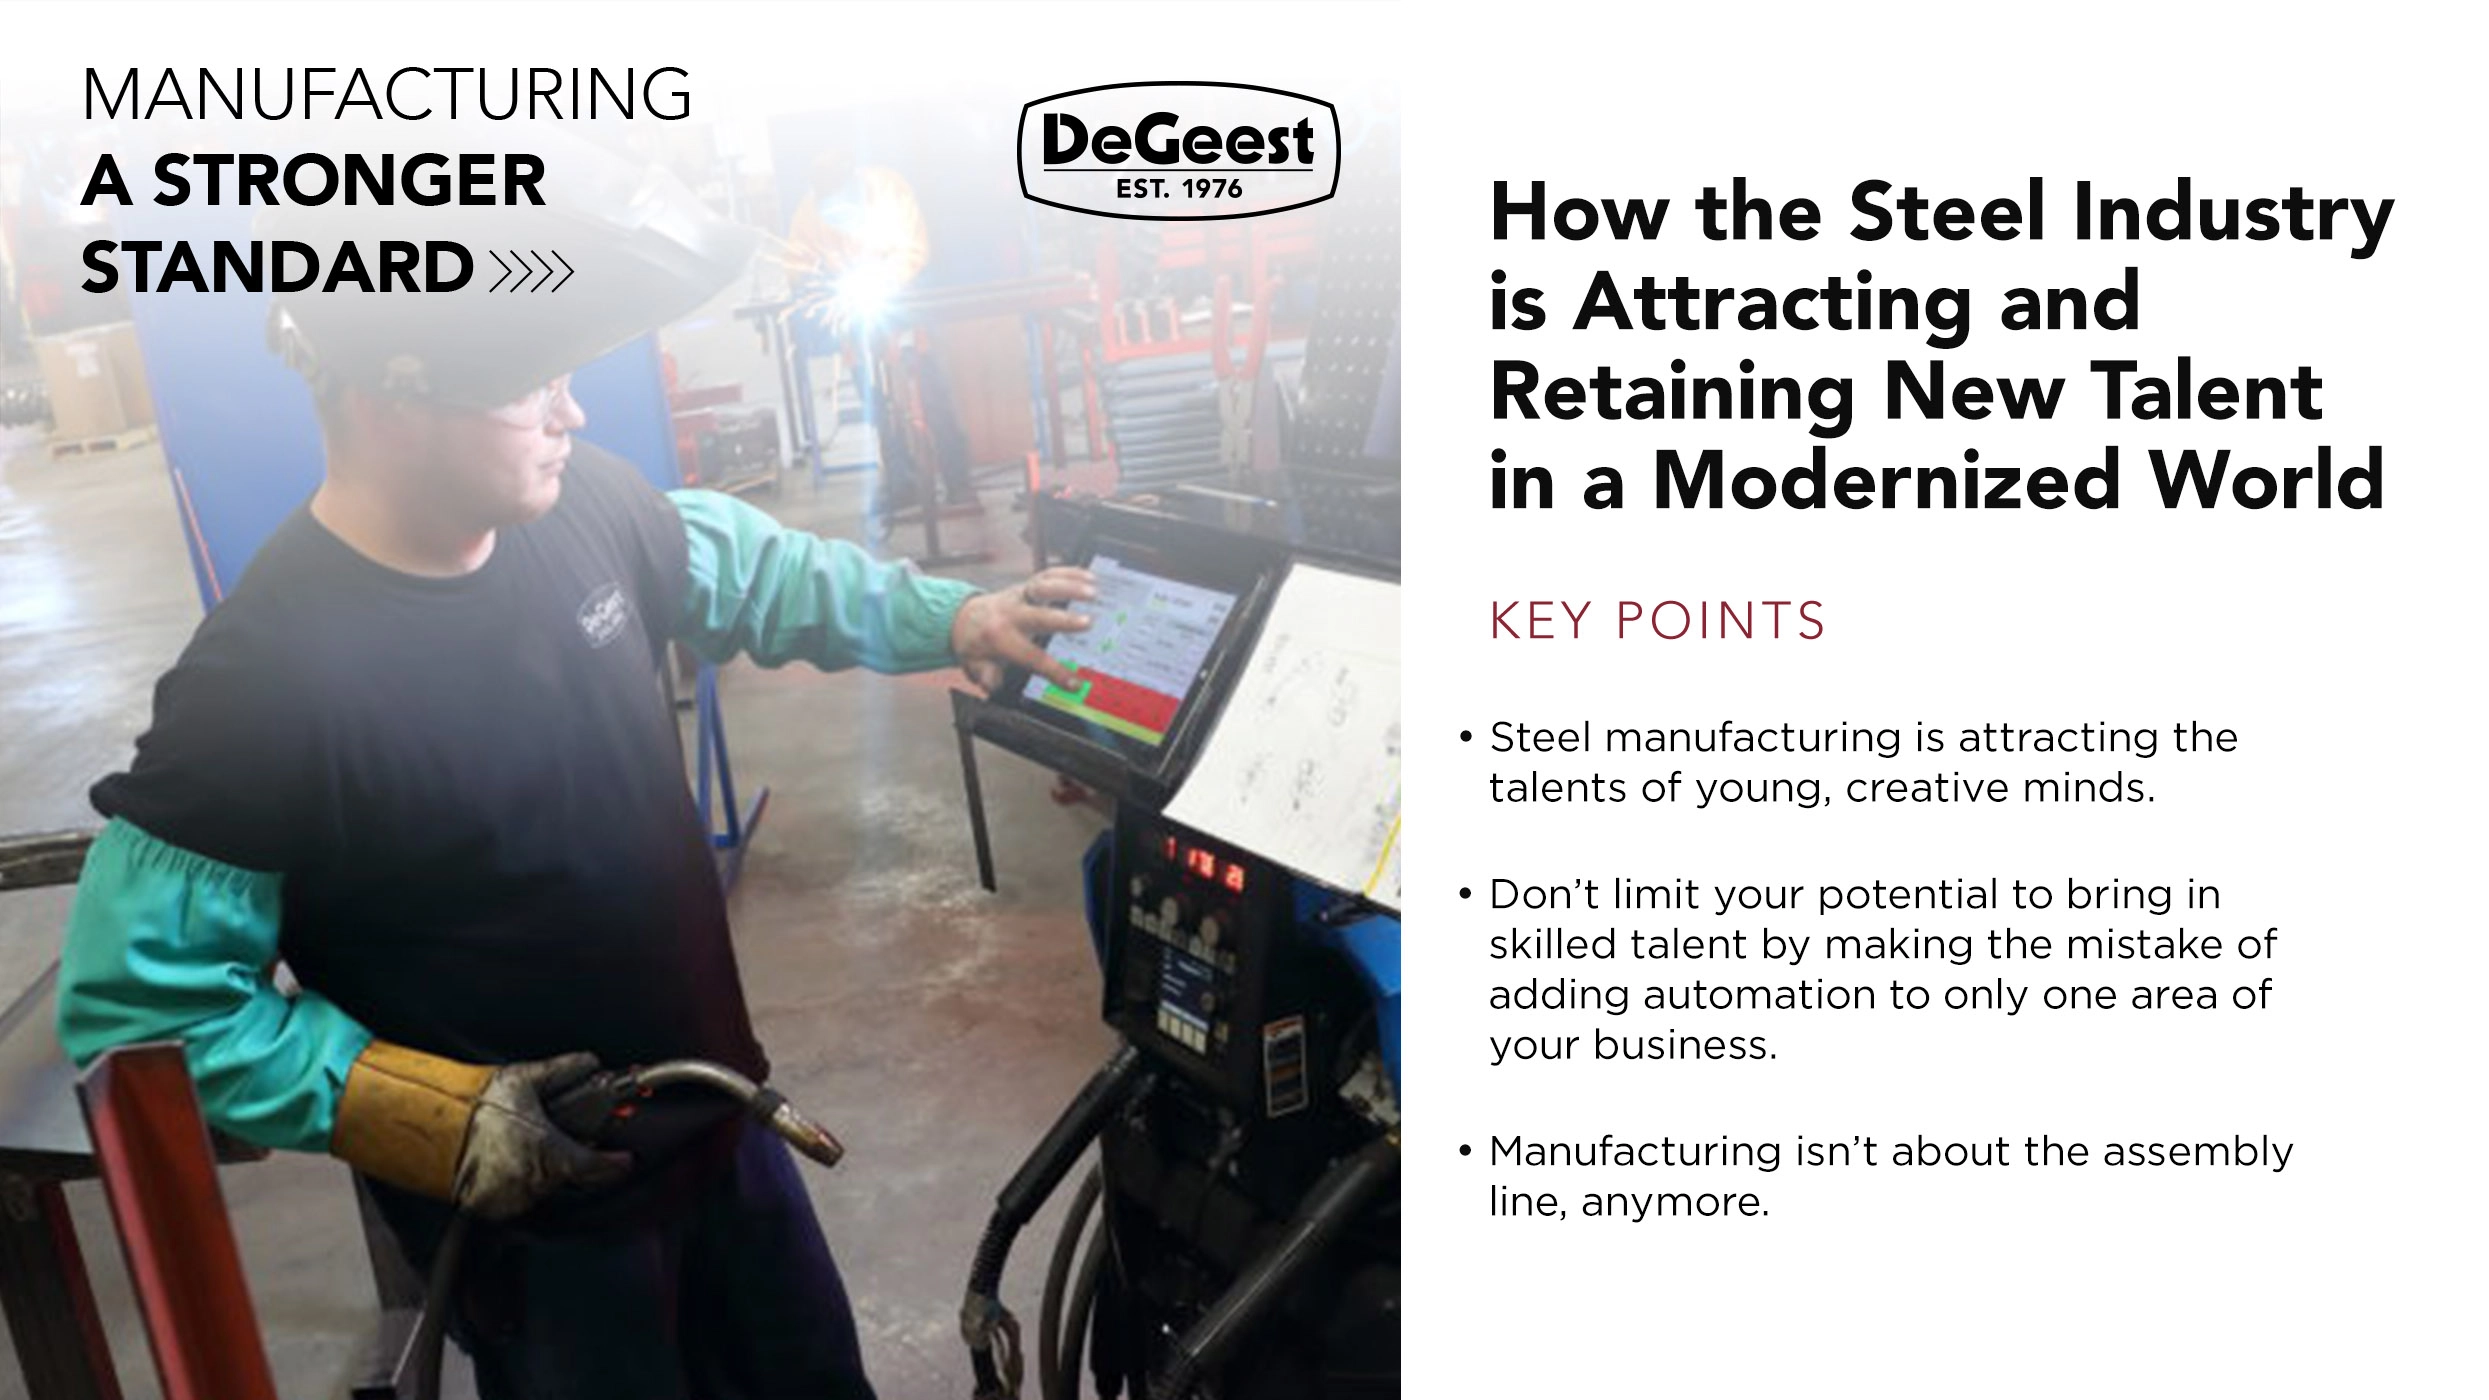 How the Steel Industry is Attracting and Retaining New Talent in a Modernized World